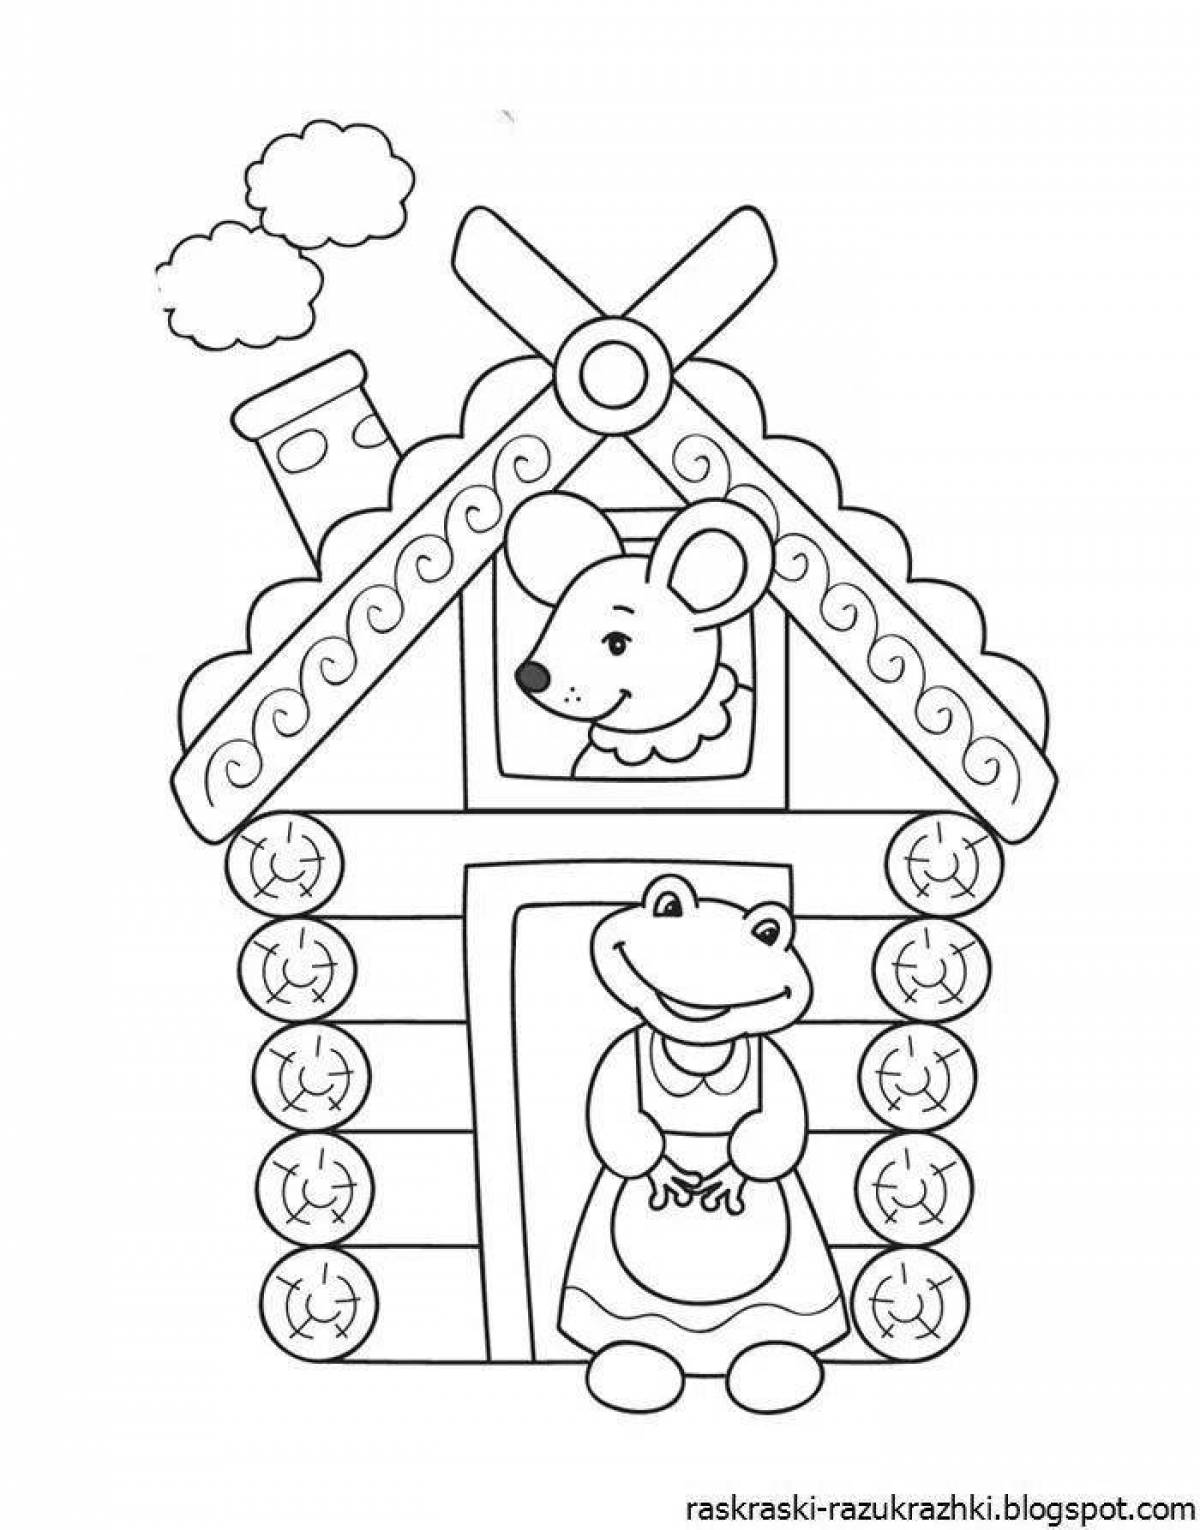 Fun coloring house for children 4-5 years old